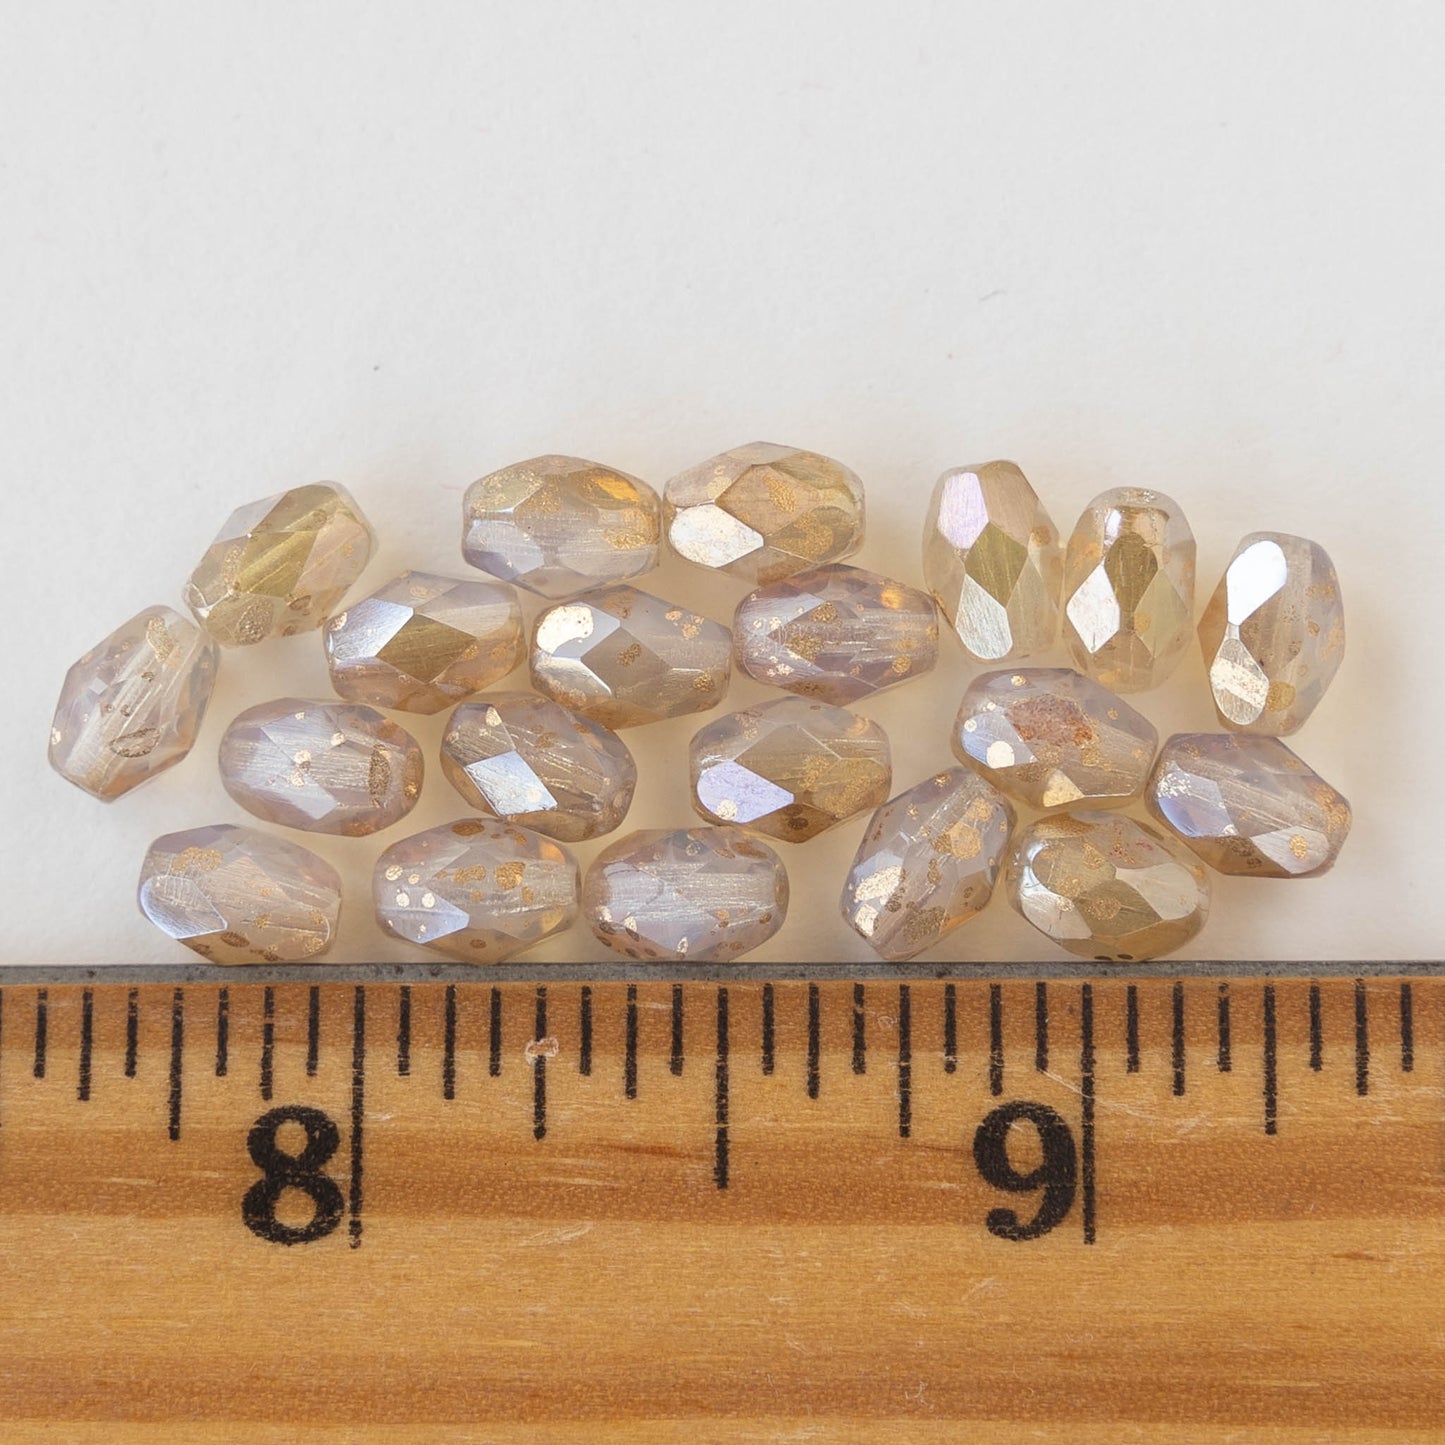 5x7mm Oval Beads - Opal with Bronze and Gold Finishes - 20 beads